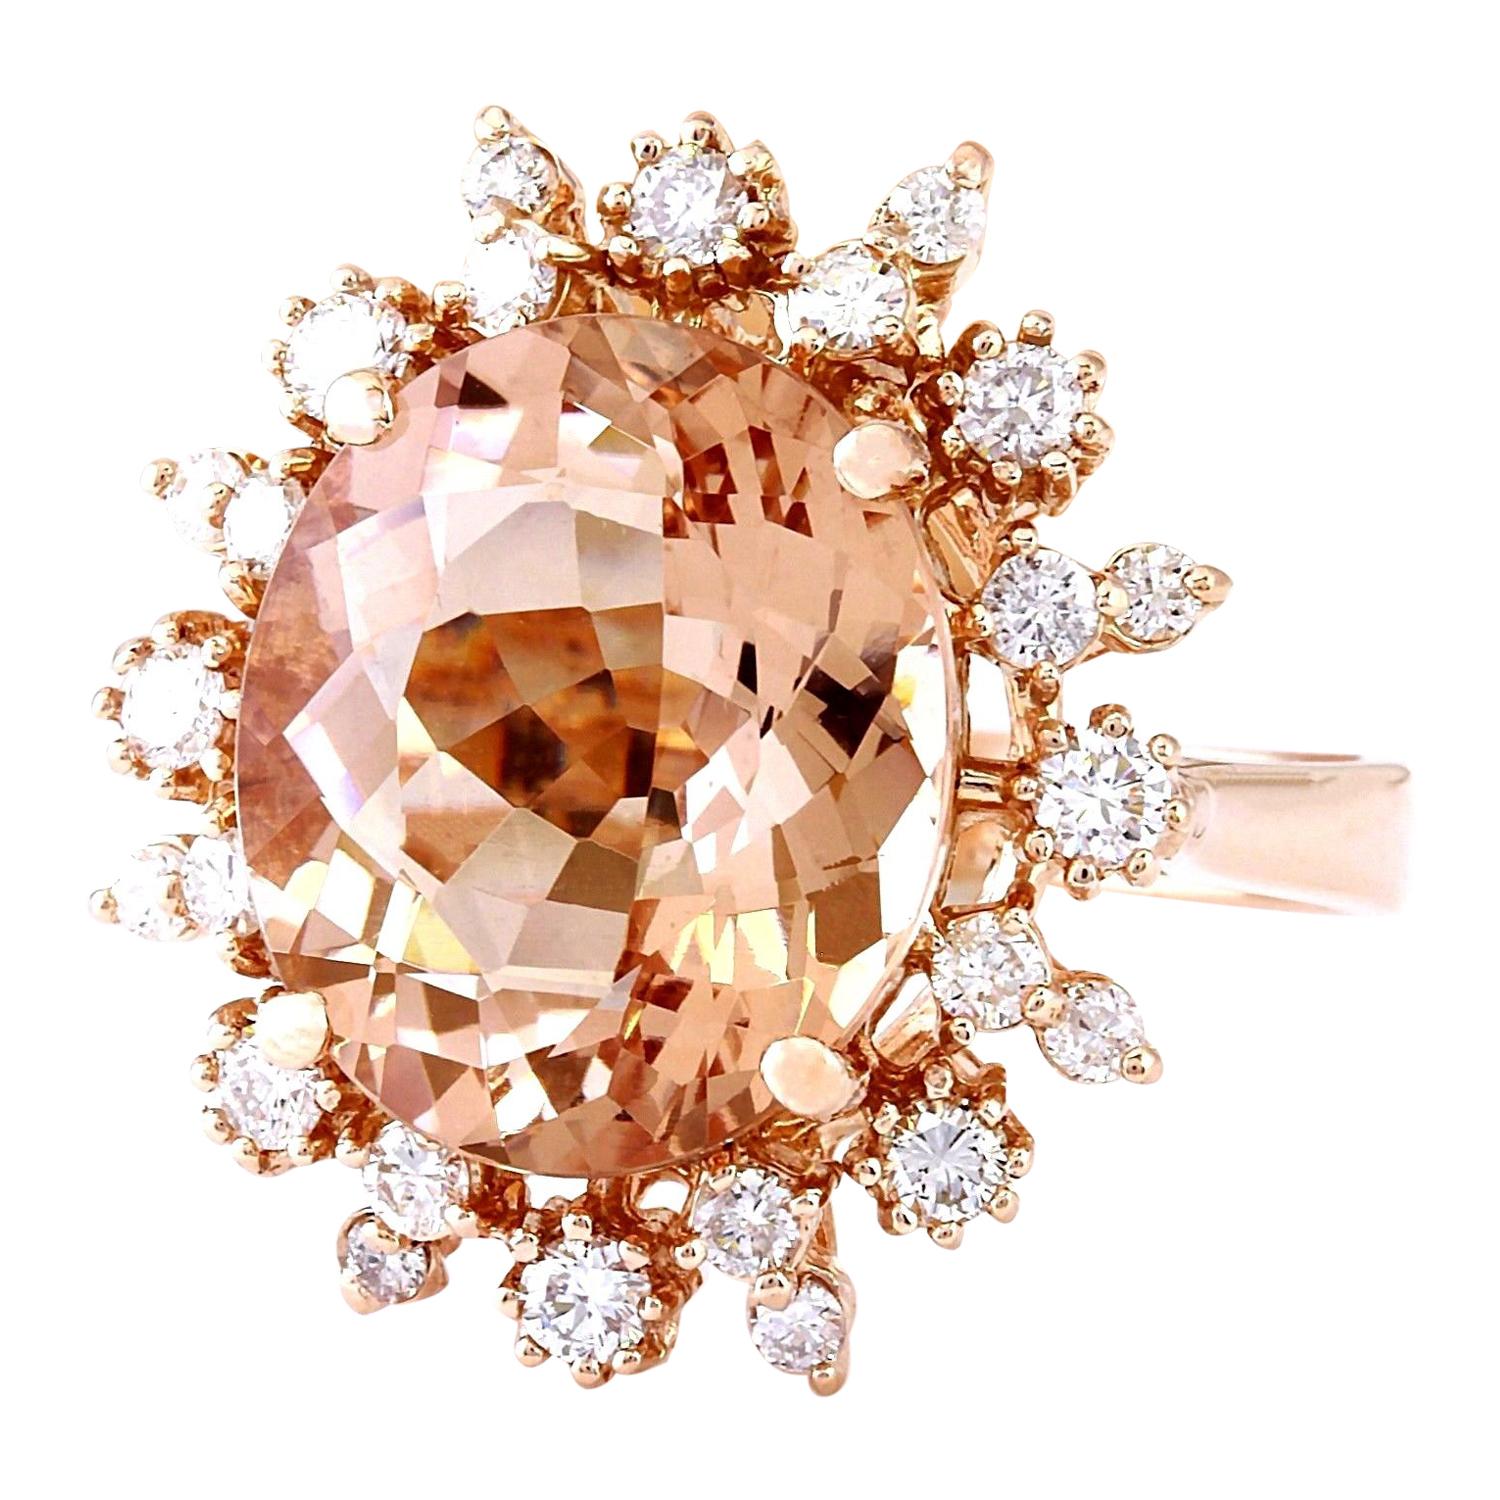 7.15 Carat Natural Morganite 14K Solid Rose Gold Diamond Ring
 Item Type: Ring
 Item Style: Cocktail
 Material: 14K Rose Gold
 Mainstone: Morganite
 Stone Color: Peach
 Stone Weight: 6.43 Carat
 Stone Shape: Oval
 Stone Quantity: 1
 Stone